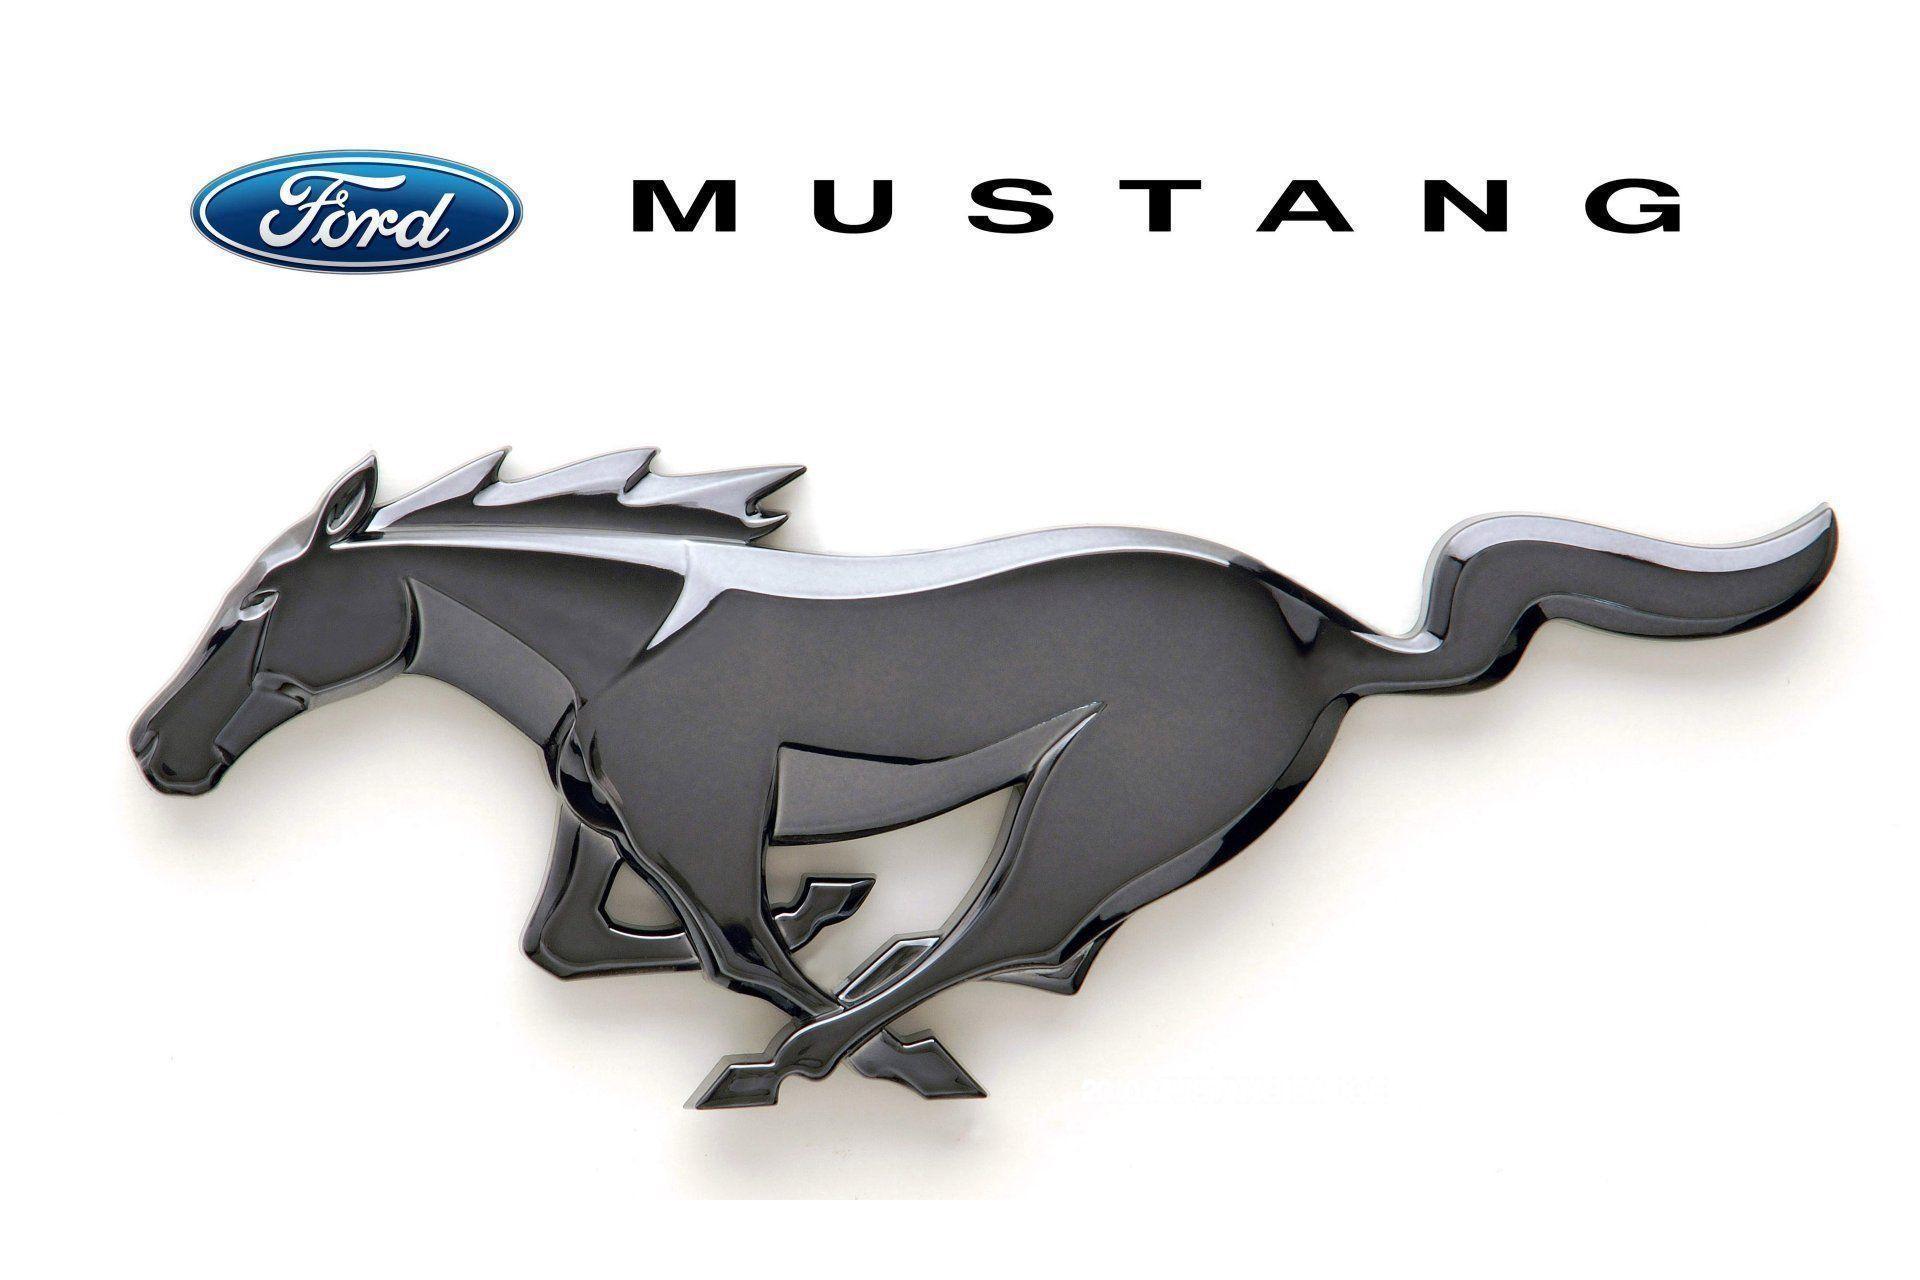 Logos For > Ford Mustang Logo Wallpapers Hd